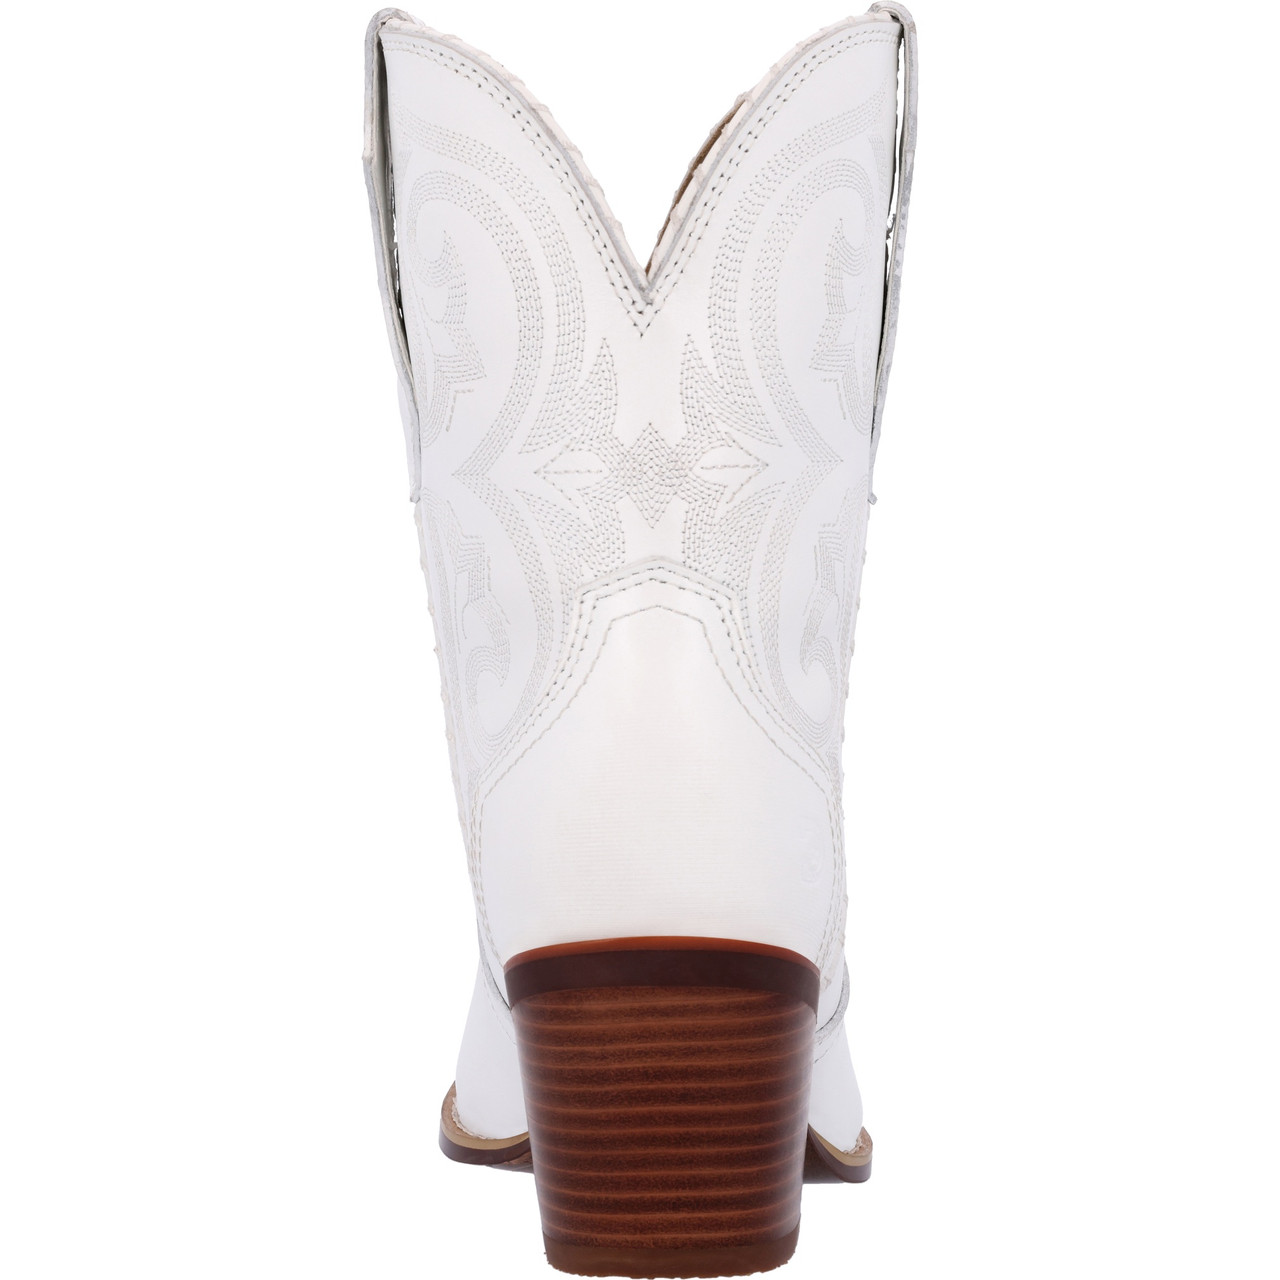 CRUSH™ BY DURANGO® WOMEN'S PEARL WHITE WESTERN FASHION BOOTS DRD0465